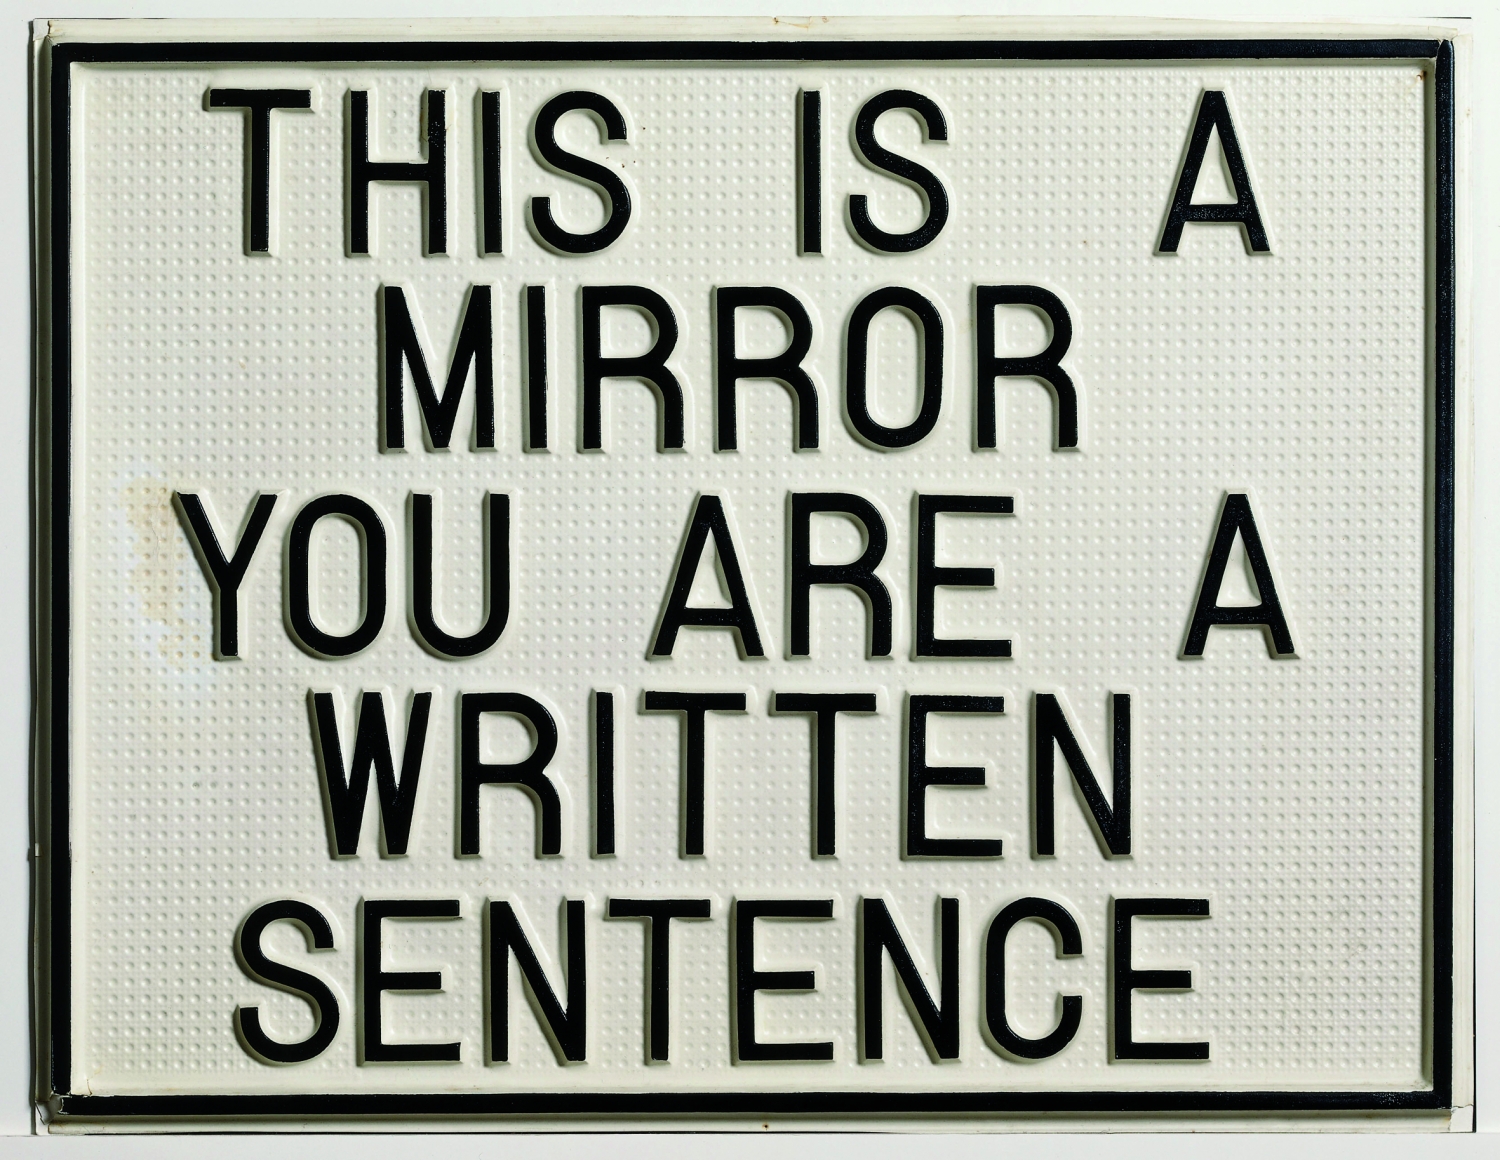 A small white plaque with a black border and caps letters spelling THIS IS A MIRROR YOU ARE A WRITTEN SENTENCE